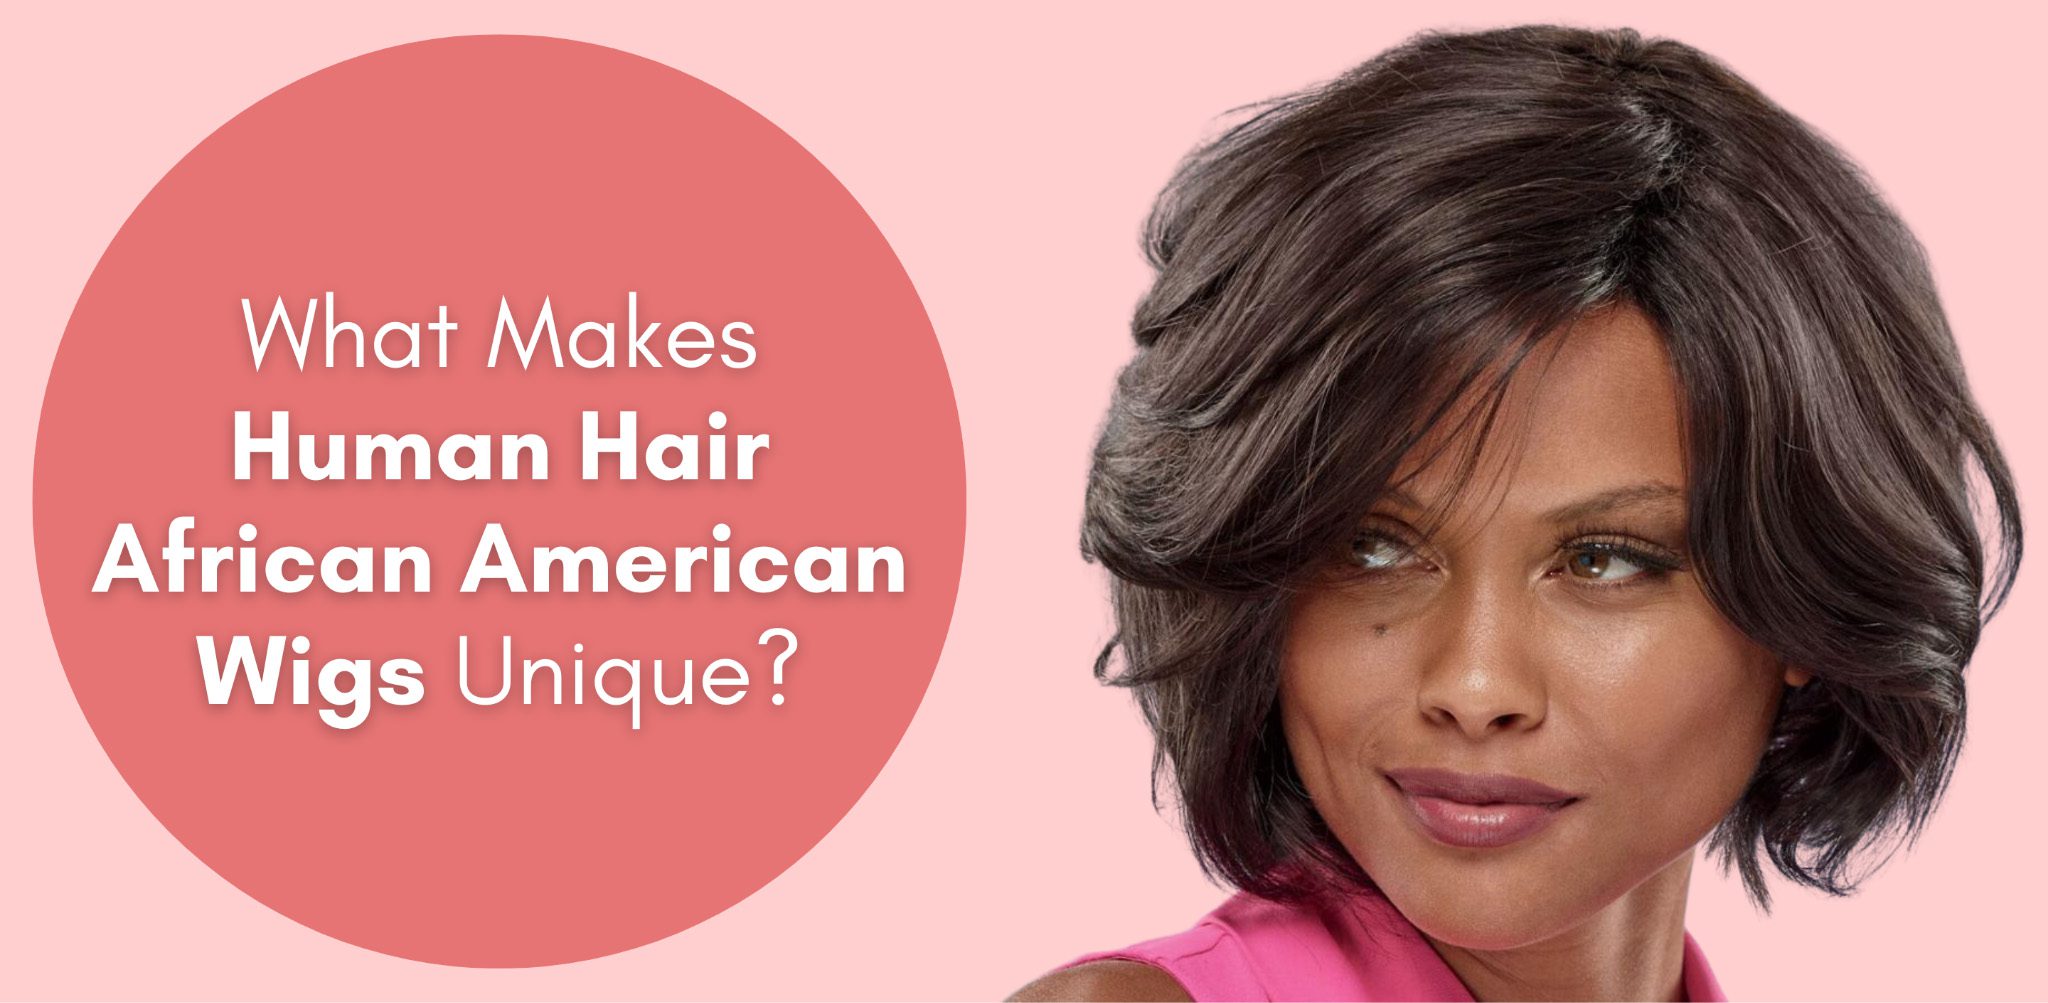 What Makes Human Hair African American Wigs Unique?